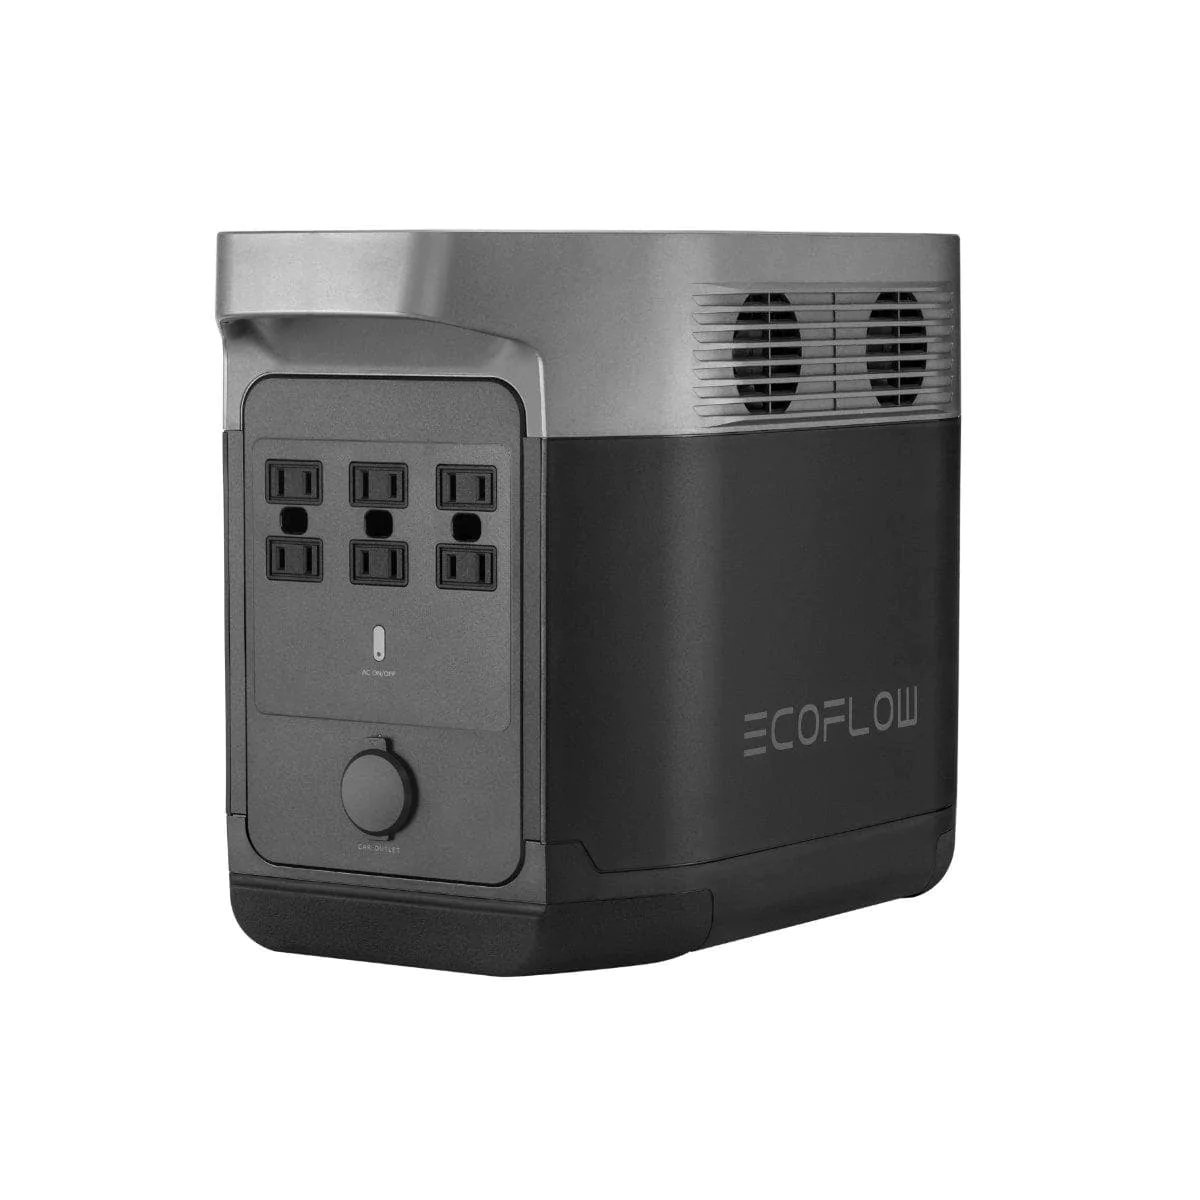 EcoFlow Delta: High-Capacity Portable Power Station for Backup Power, RV Living, Outdoor Adventures and More - 1300-1350 Watt-hours